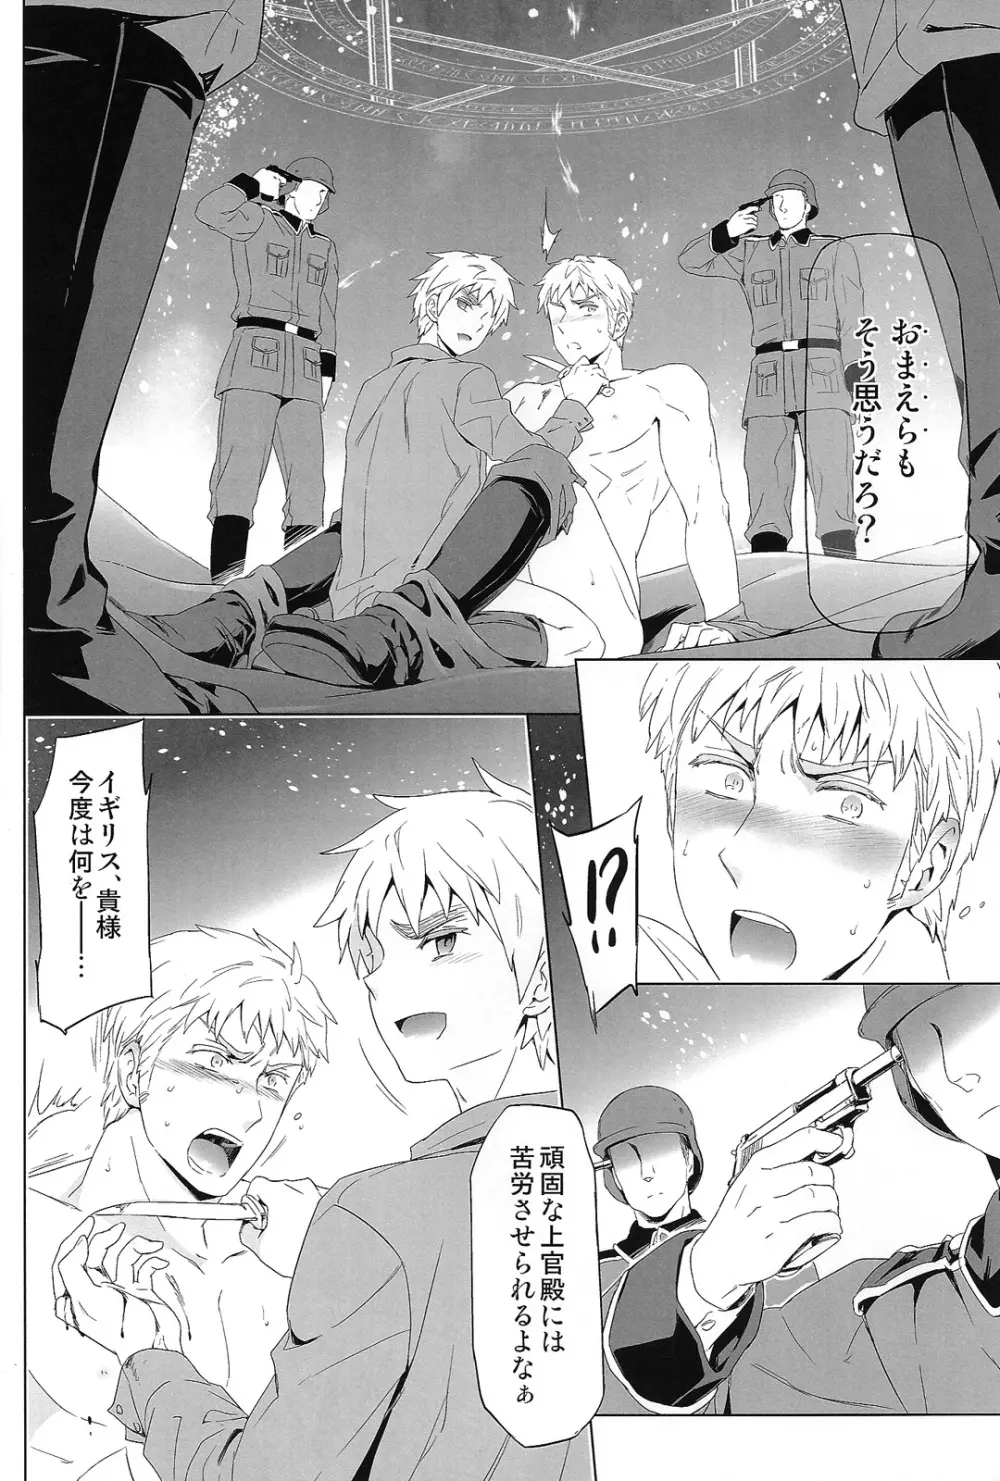 Magia Sexualis 2 Page.23